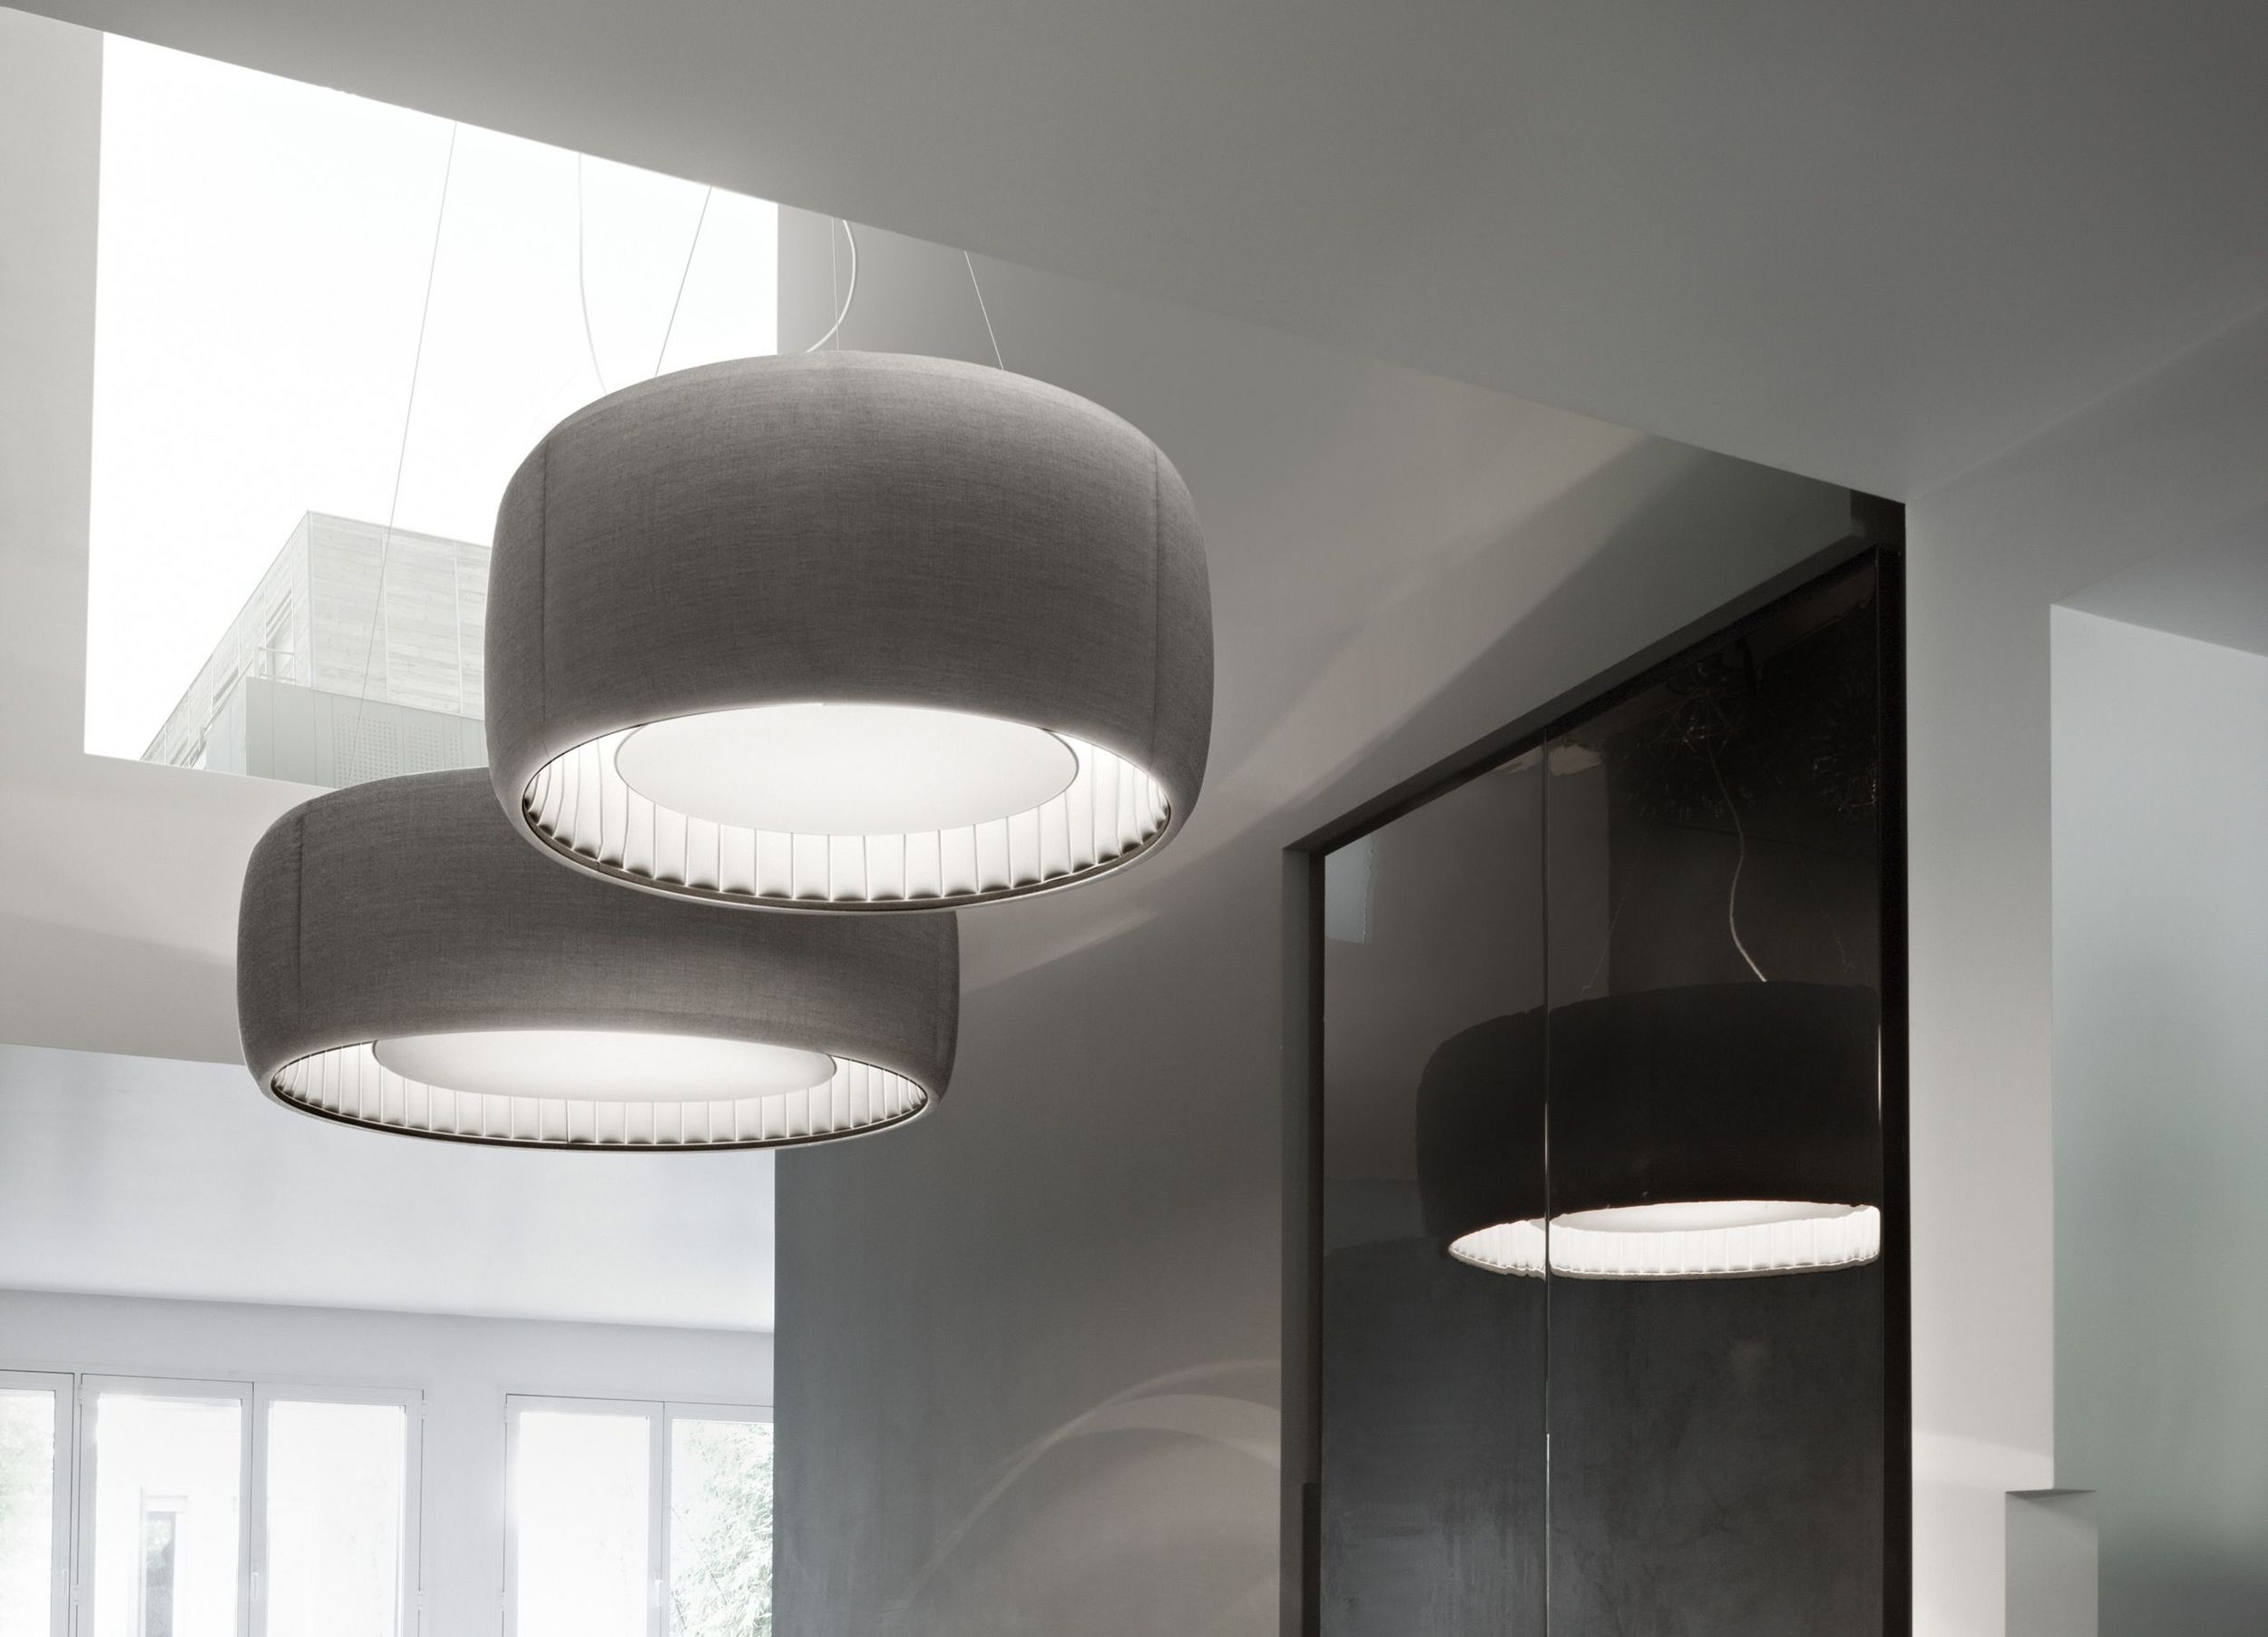 Silenzio lighting and sound absorption system by Monica Armani for Luceplan